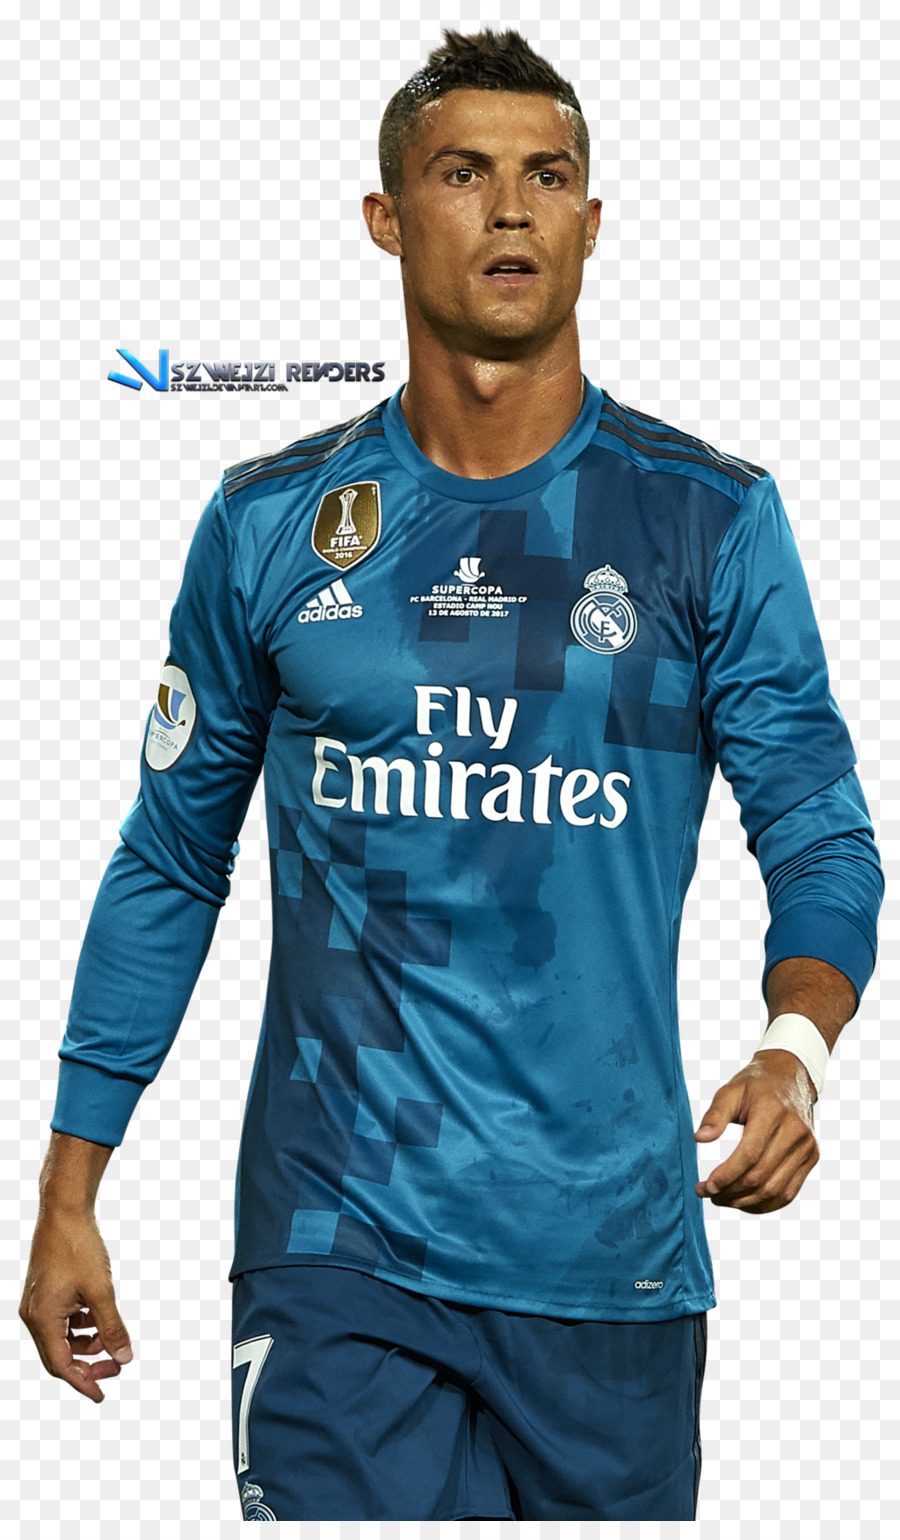 Real Madrid png download.